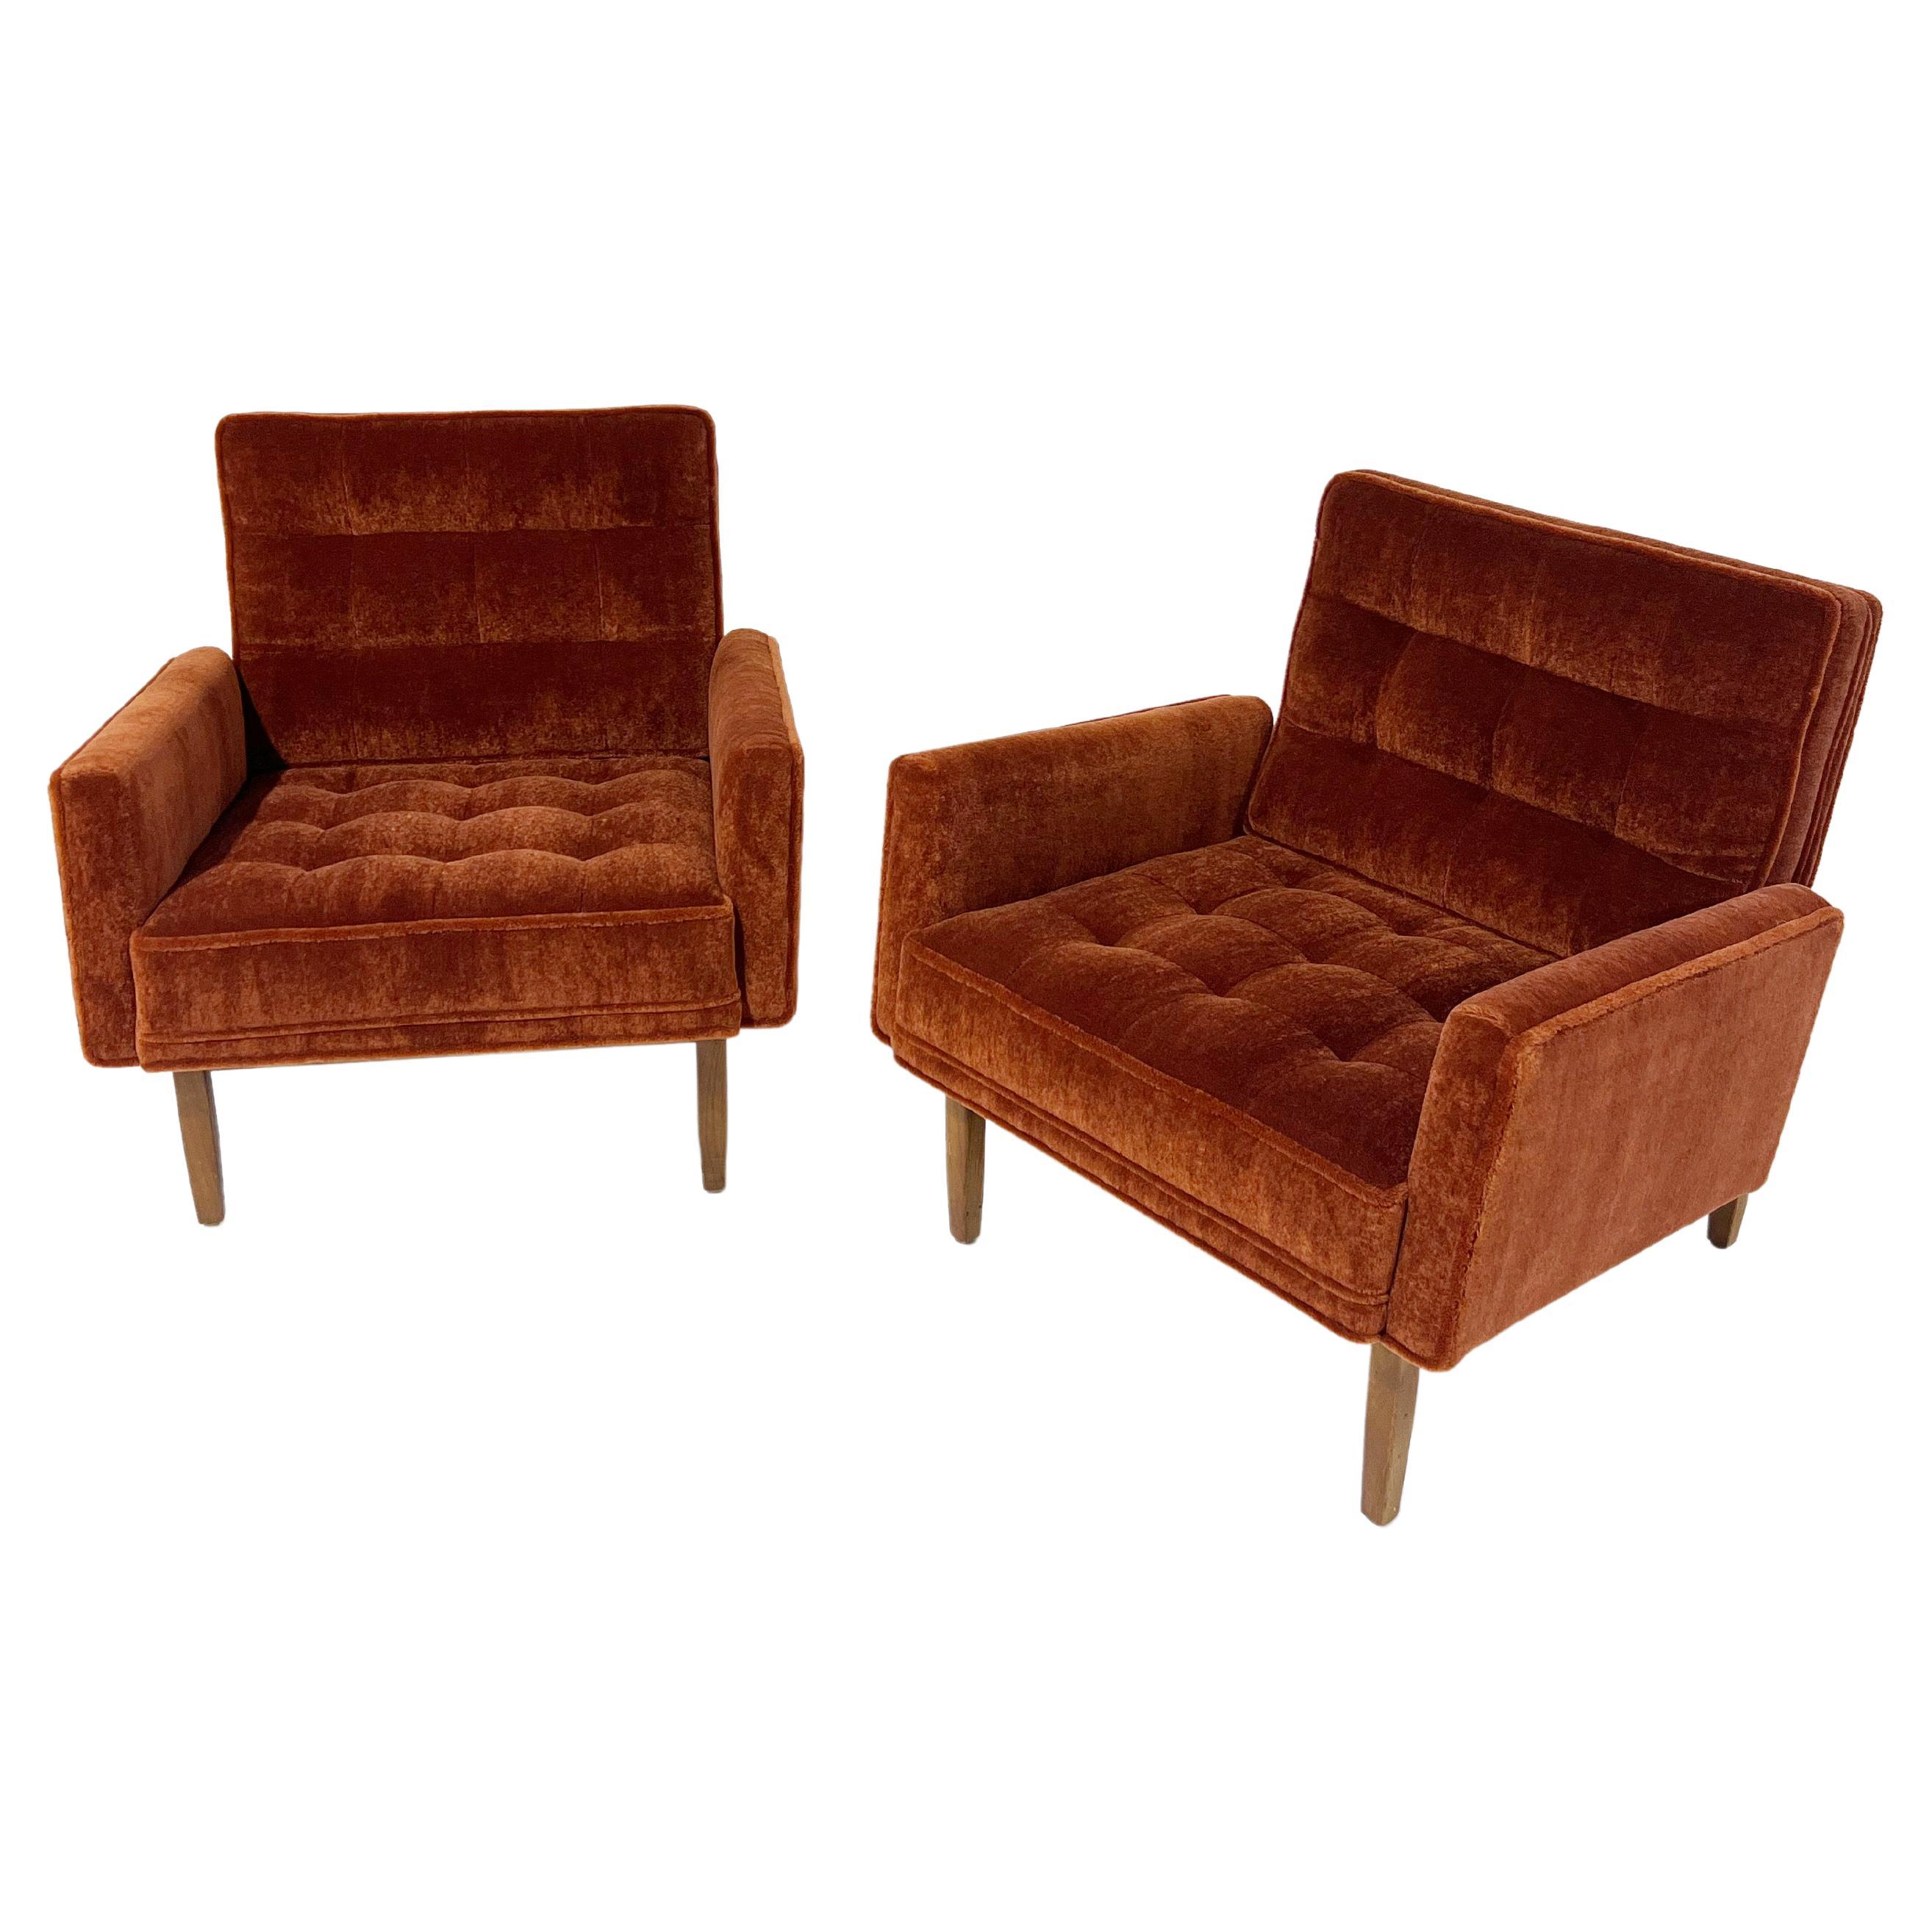 Florence Knoll Armchairs in Pierre Frey Teddy Mohair For Sale